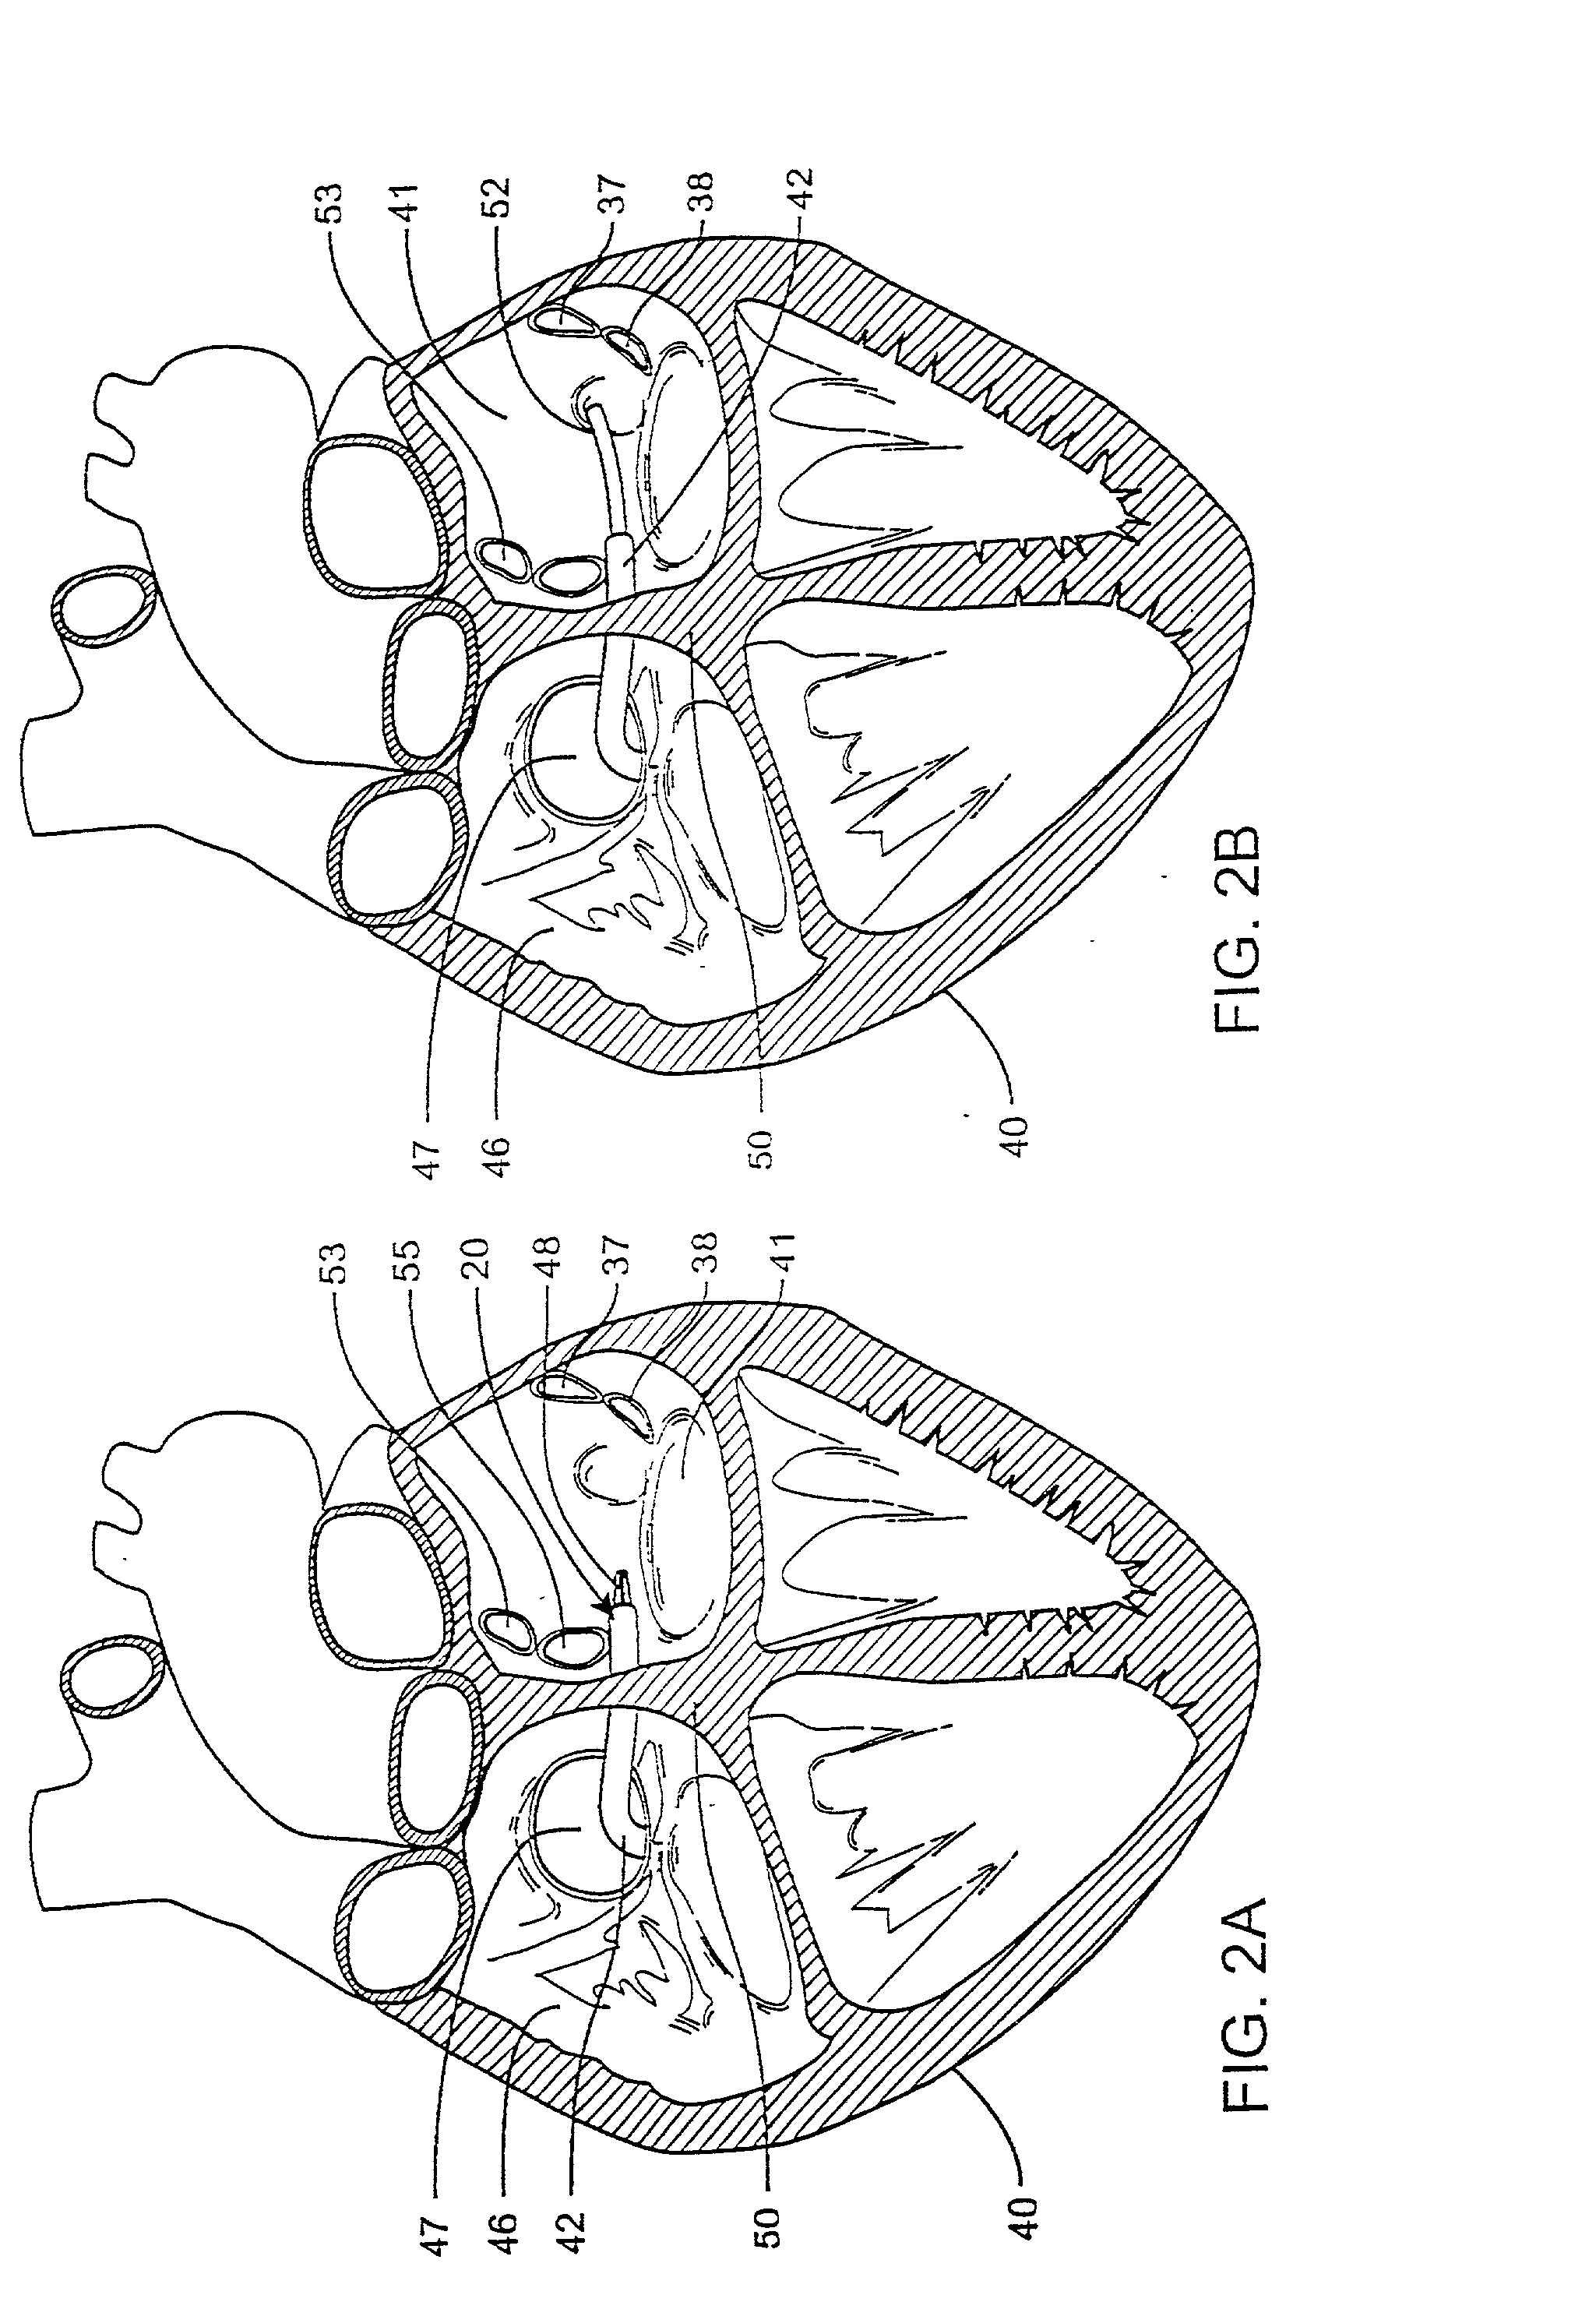 Medical instrument positioning tool and method